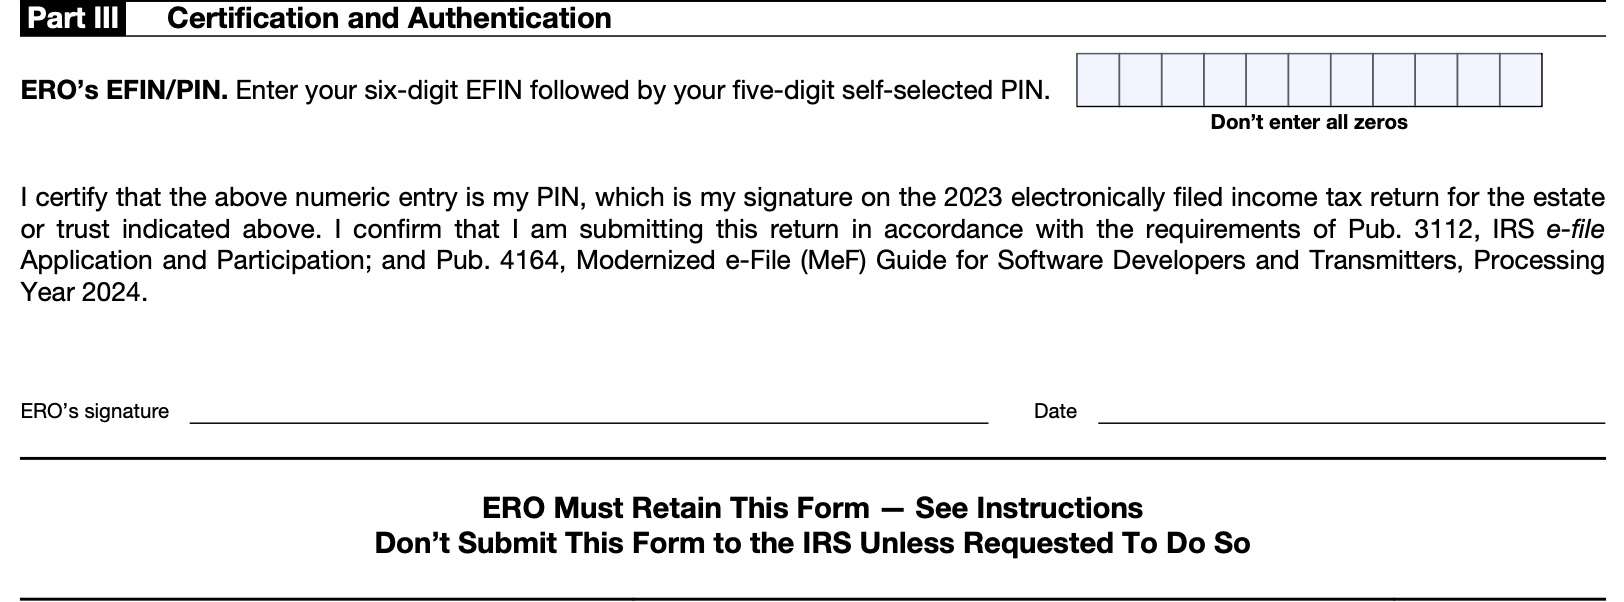 irs form 8879-f, part iii: certification and authentication